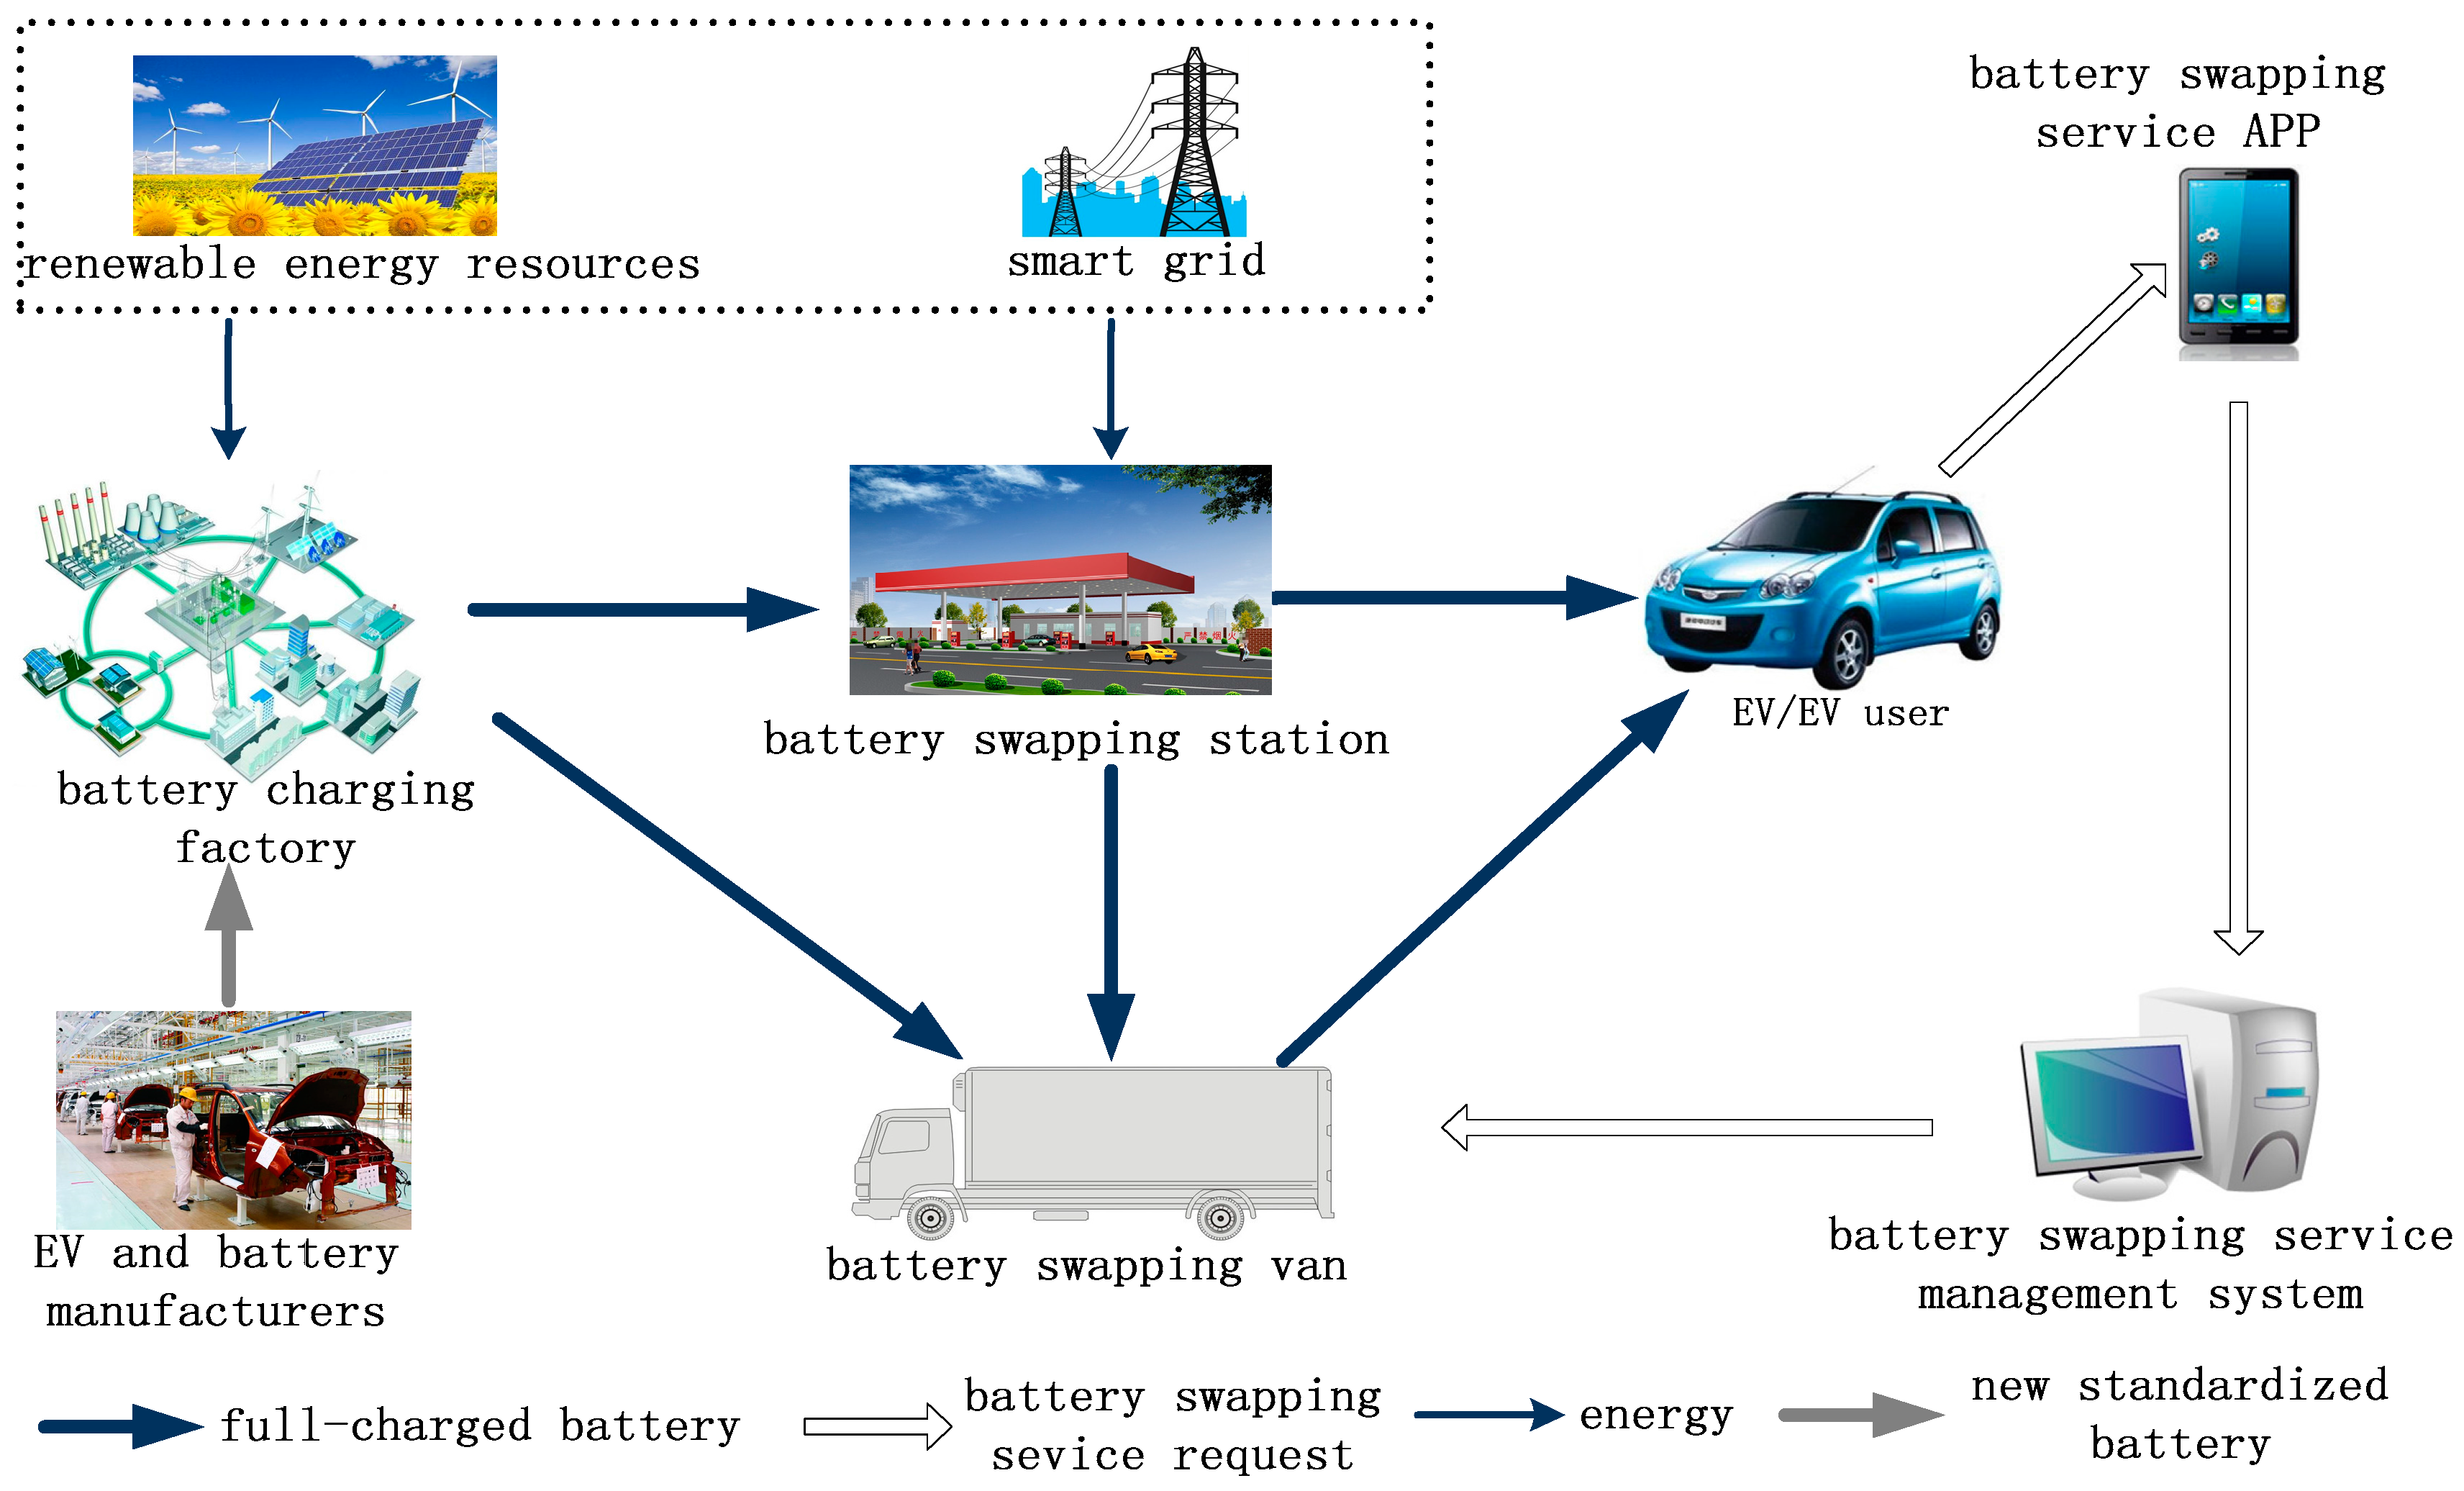 Energies | Free Full-Text | A Mobile Battery Swapping Service for Electric  Vehicles Based on a Battery Swapping Van